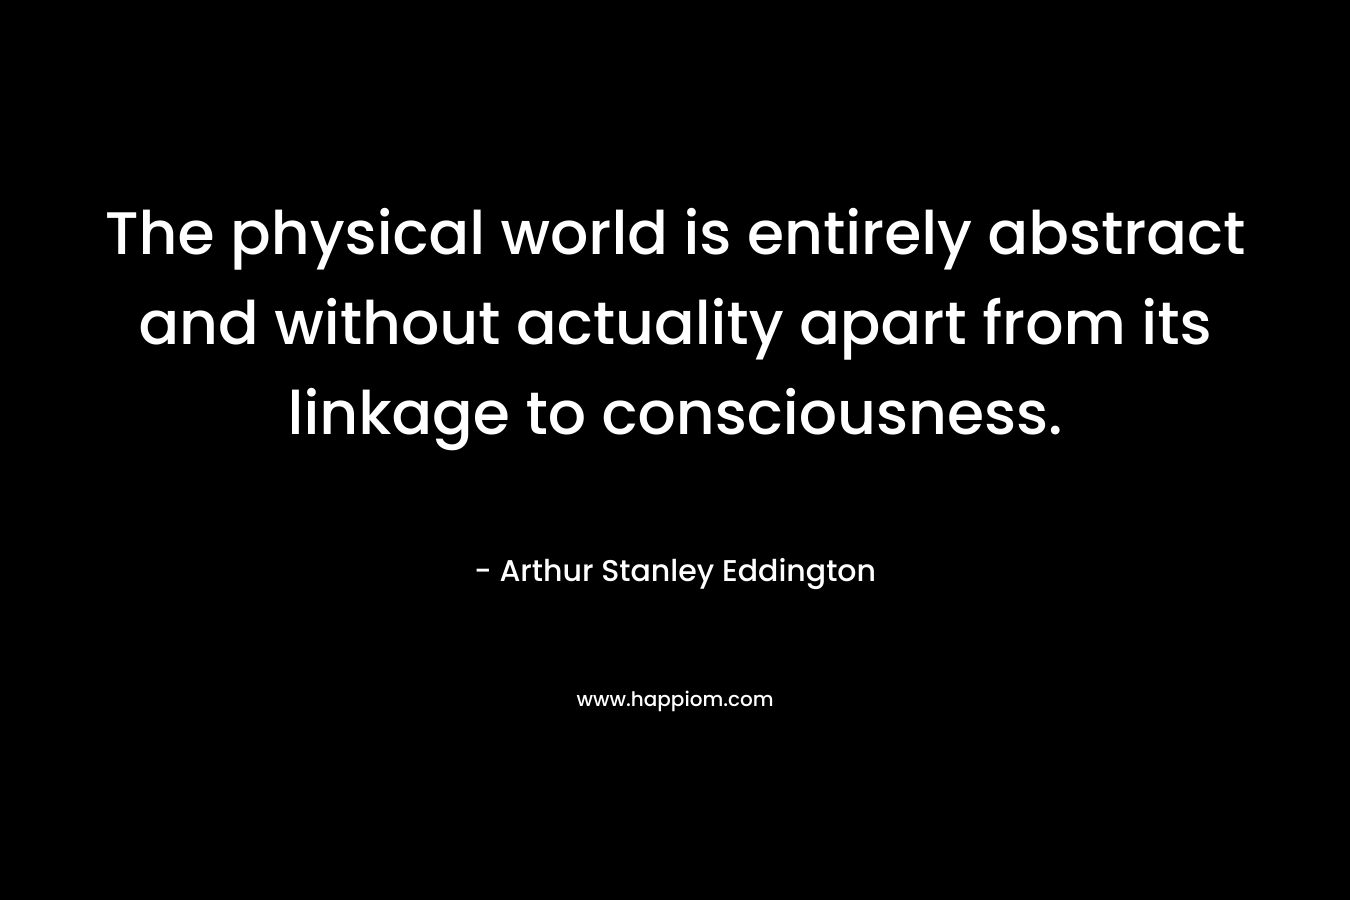 The physical world is entirely abstract and without actuality apart from its linkage to consciousness.